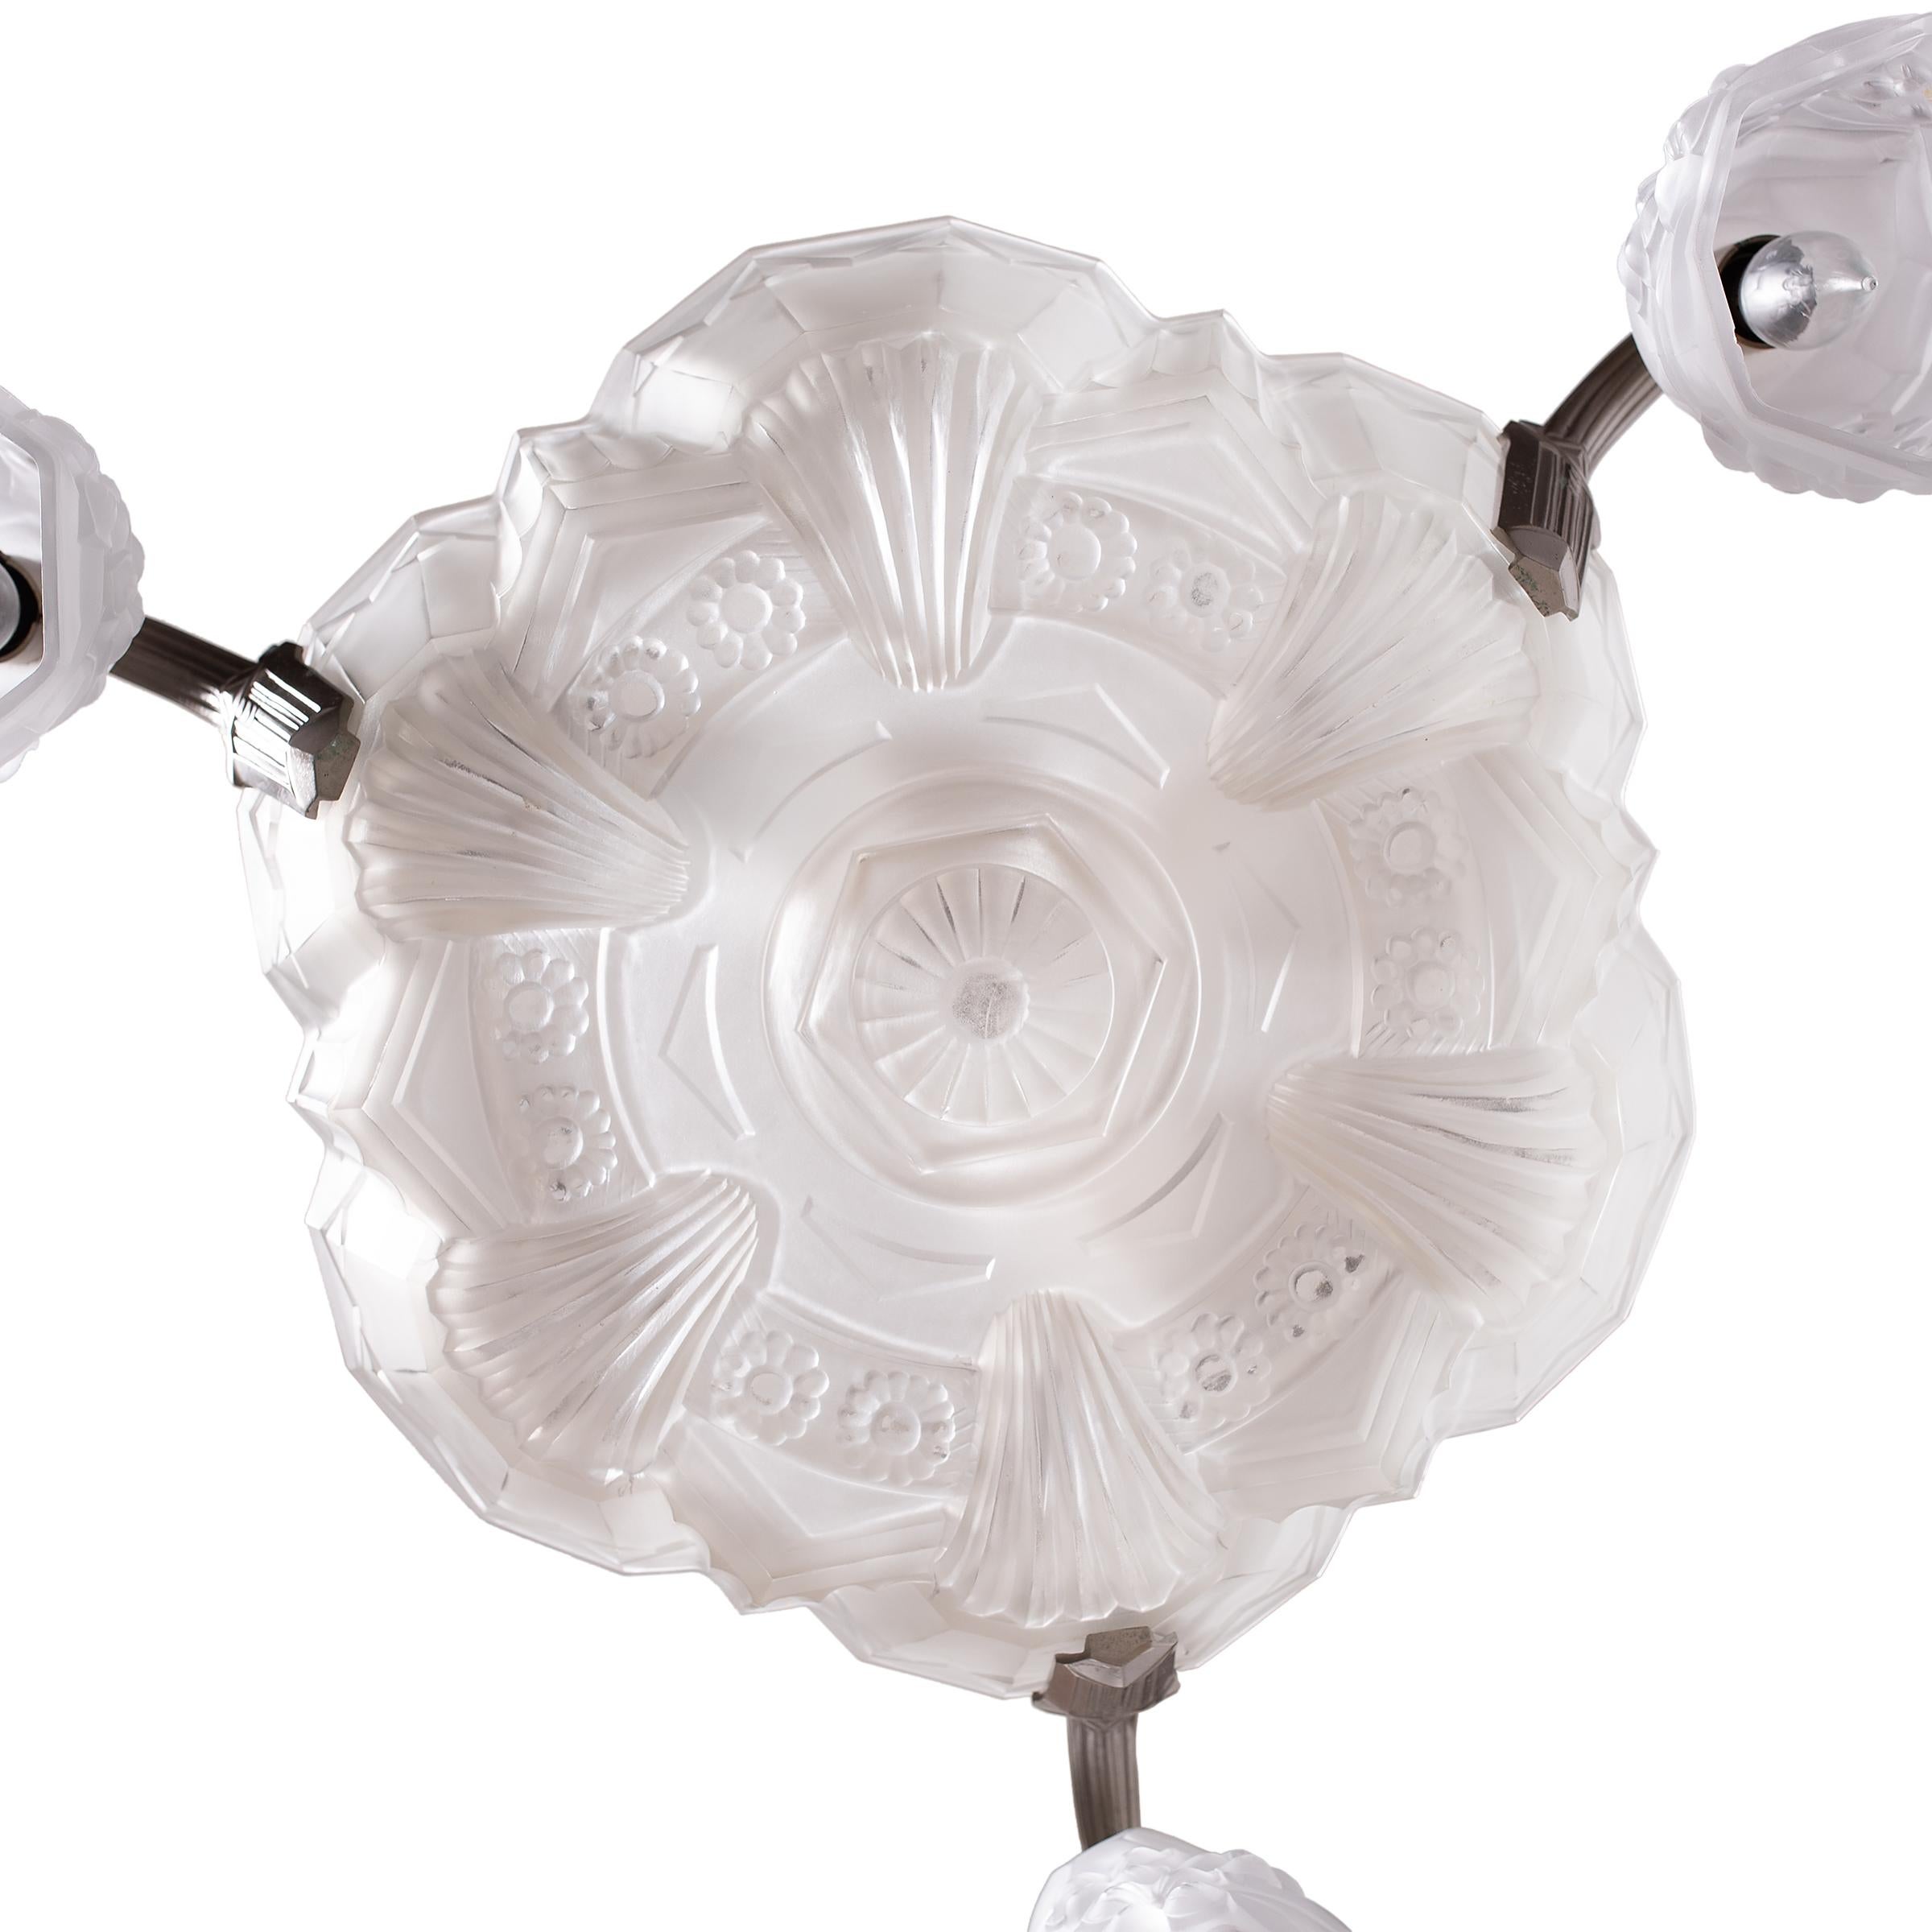 This magnificent hanging light fixture is a rare French Art Deco chandelier of frosted glass set within a nickel-plated bronze frame. The grand chandelier features clear frosted molded-glass shades with intricate designs of distinctly Art Deco